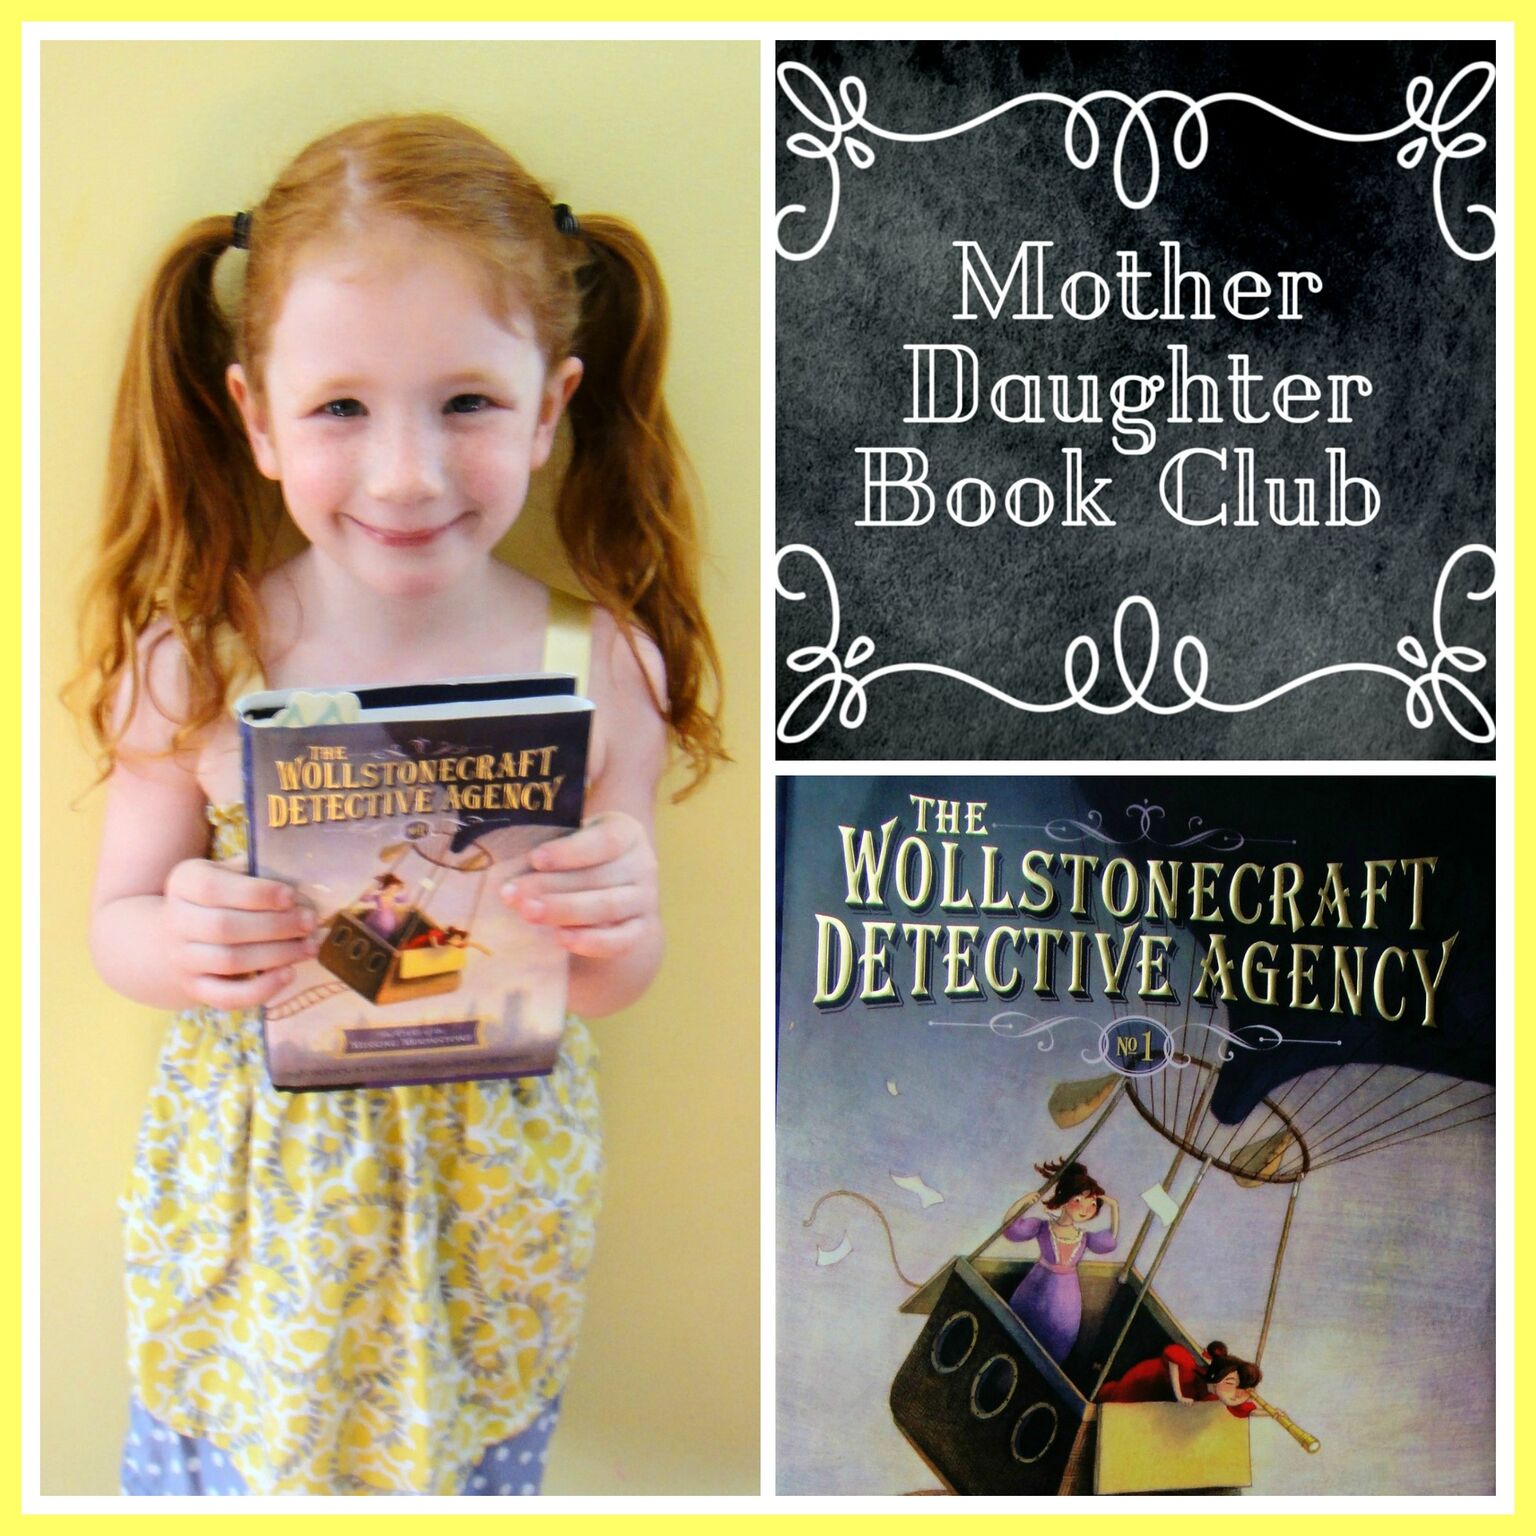 TAKE A TRIP BACK IN TIME WITH THE WOLLSTONECRAFT DETECTIVE AGENCY BOOK CLUB PARTY!